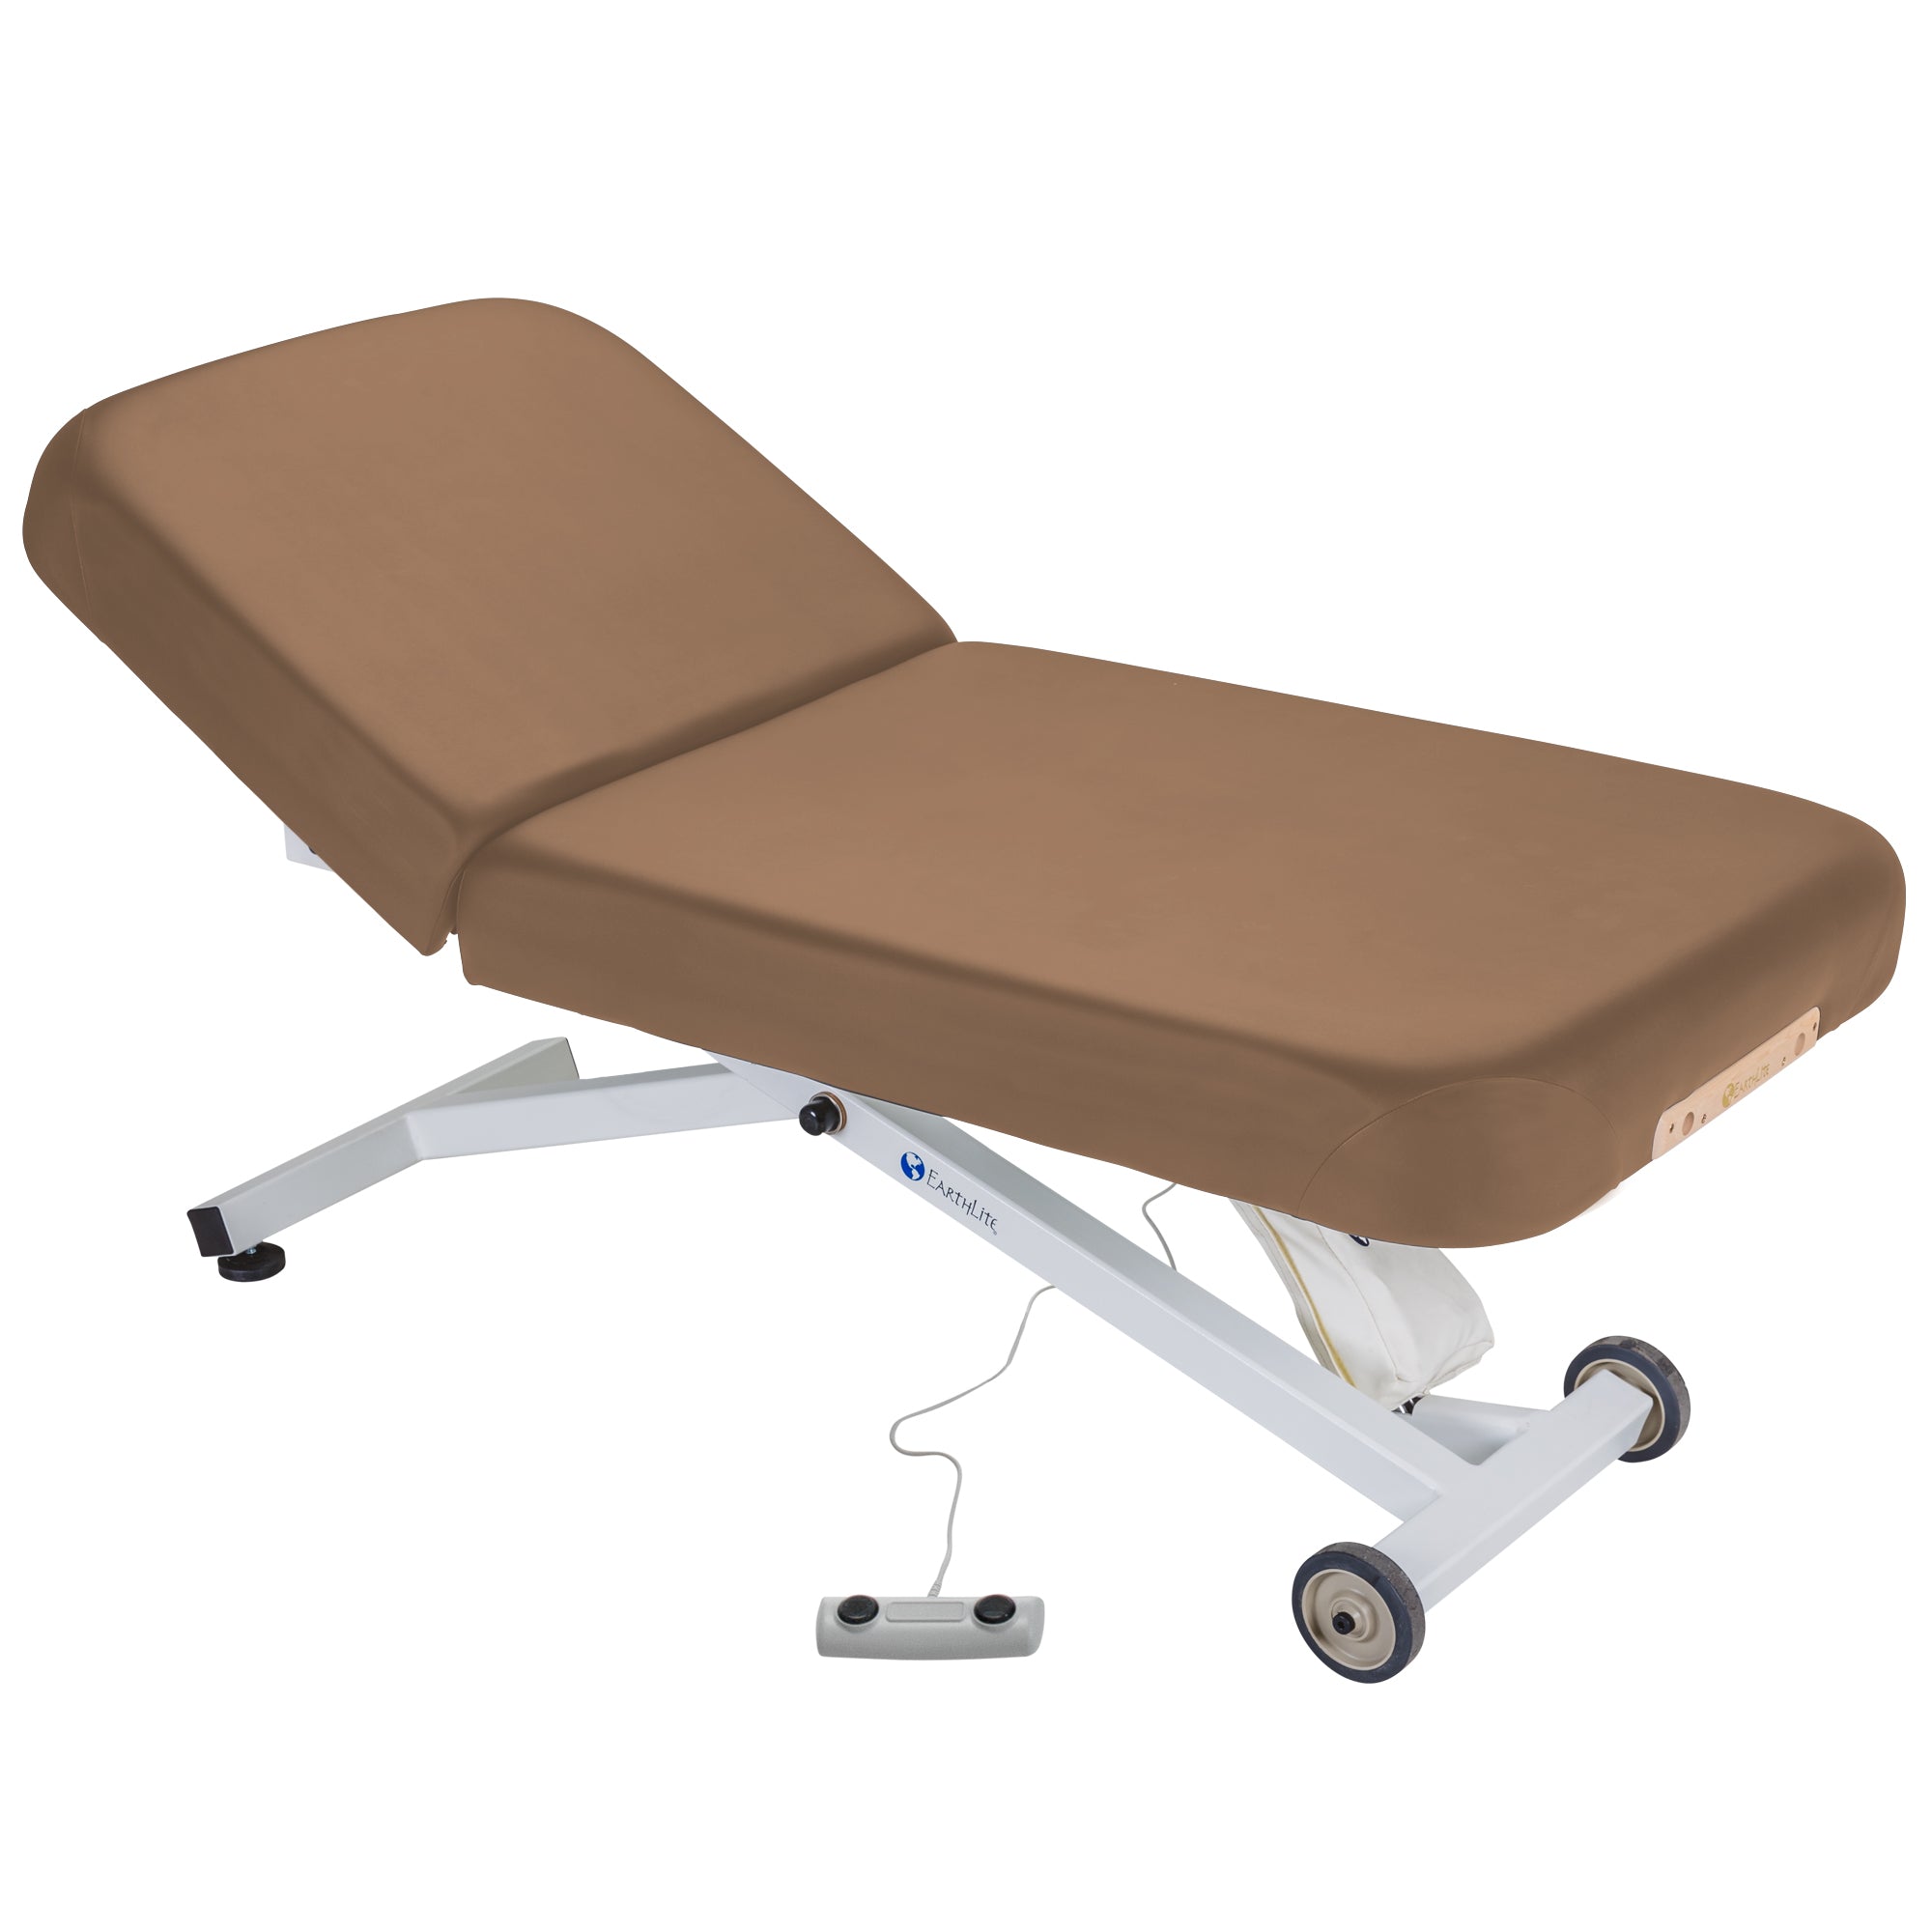 EarthLite Ellora™ Electric Hydraulic Lift Massage Table